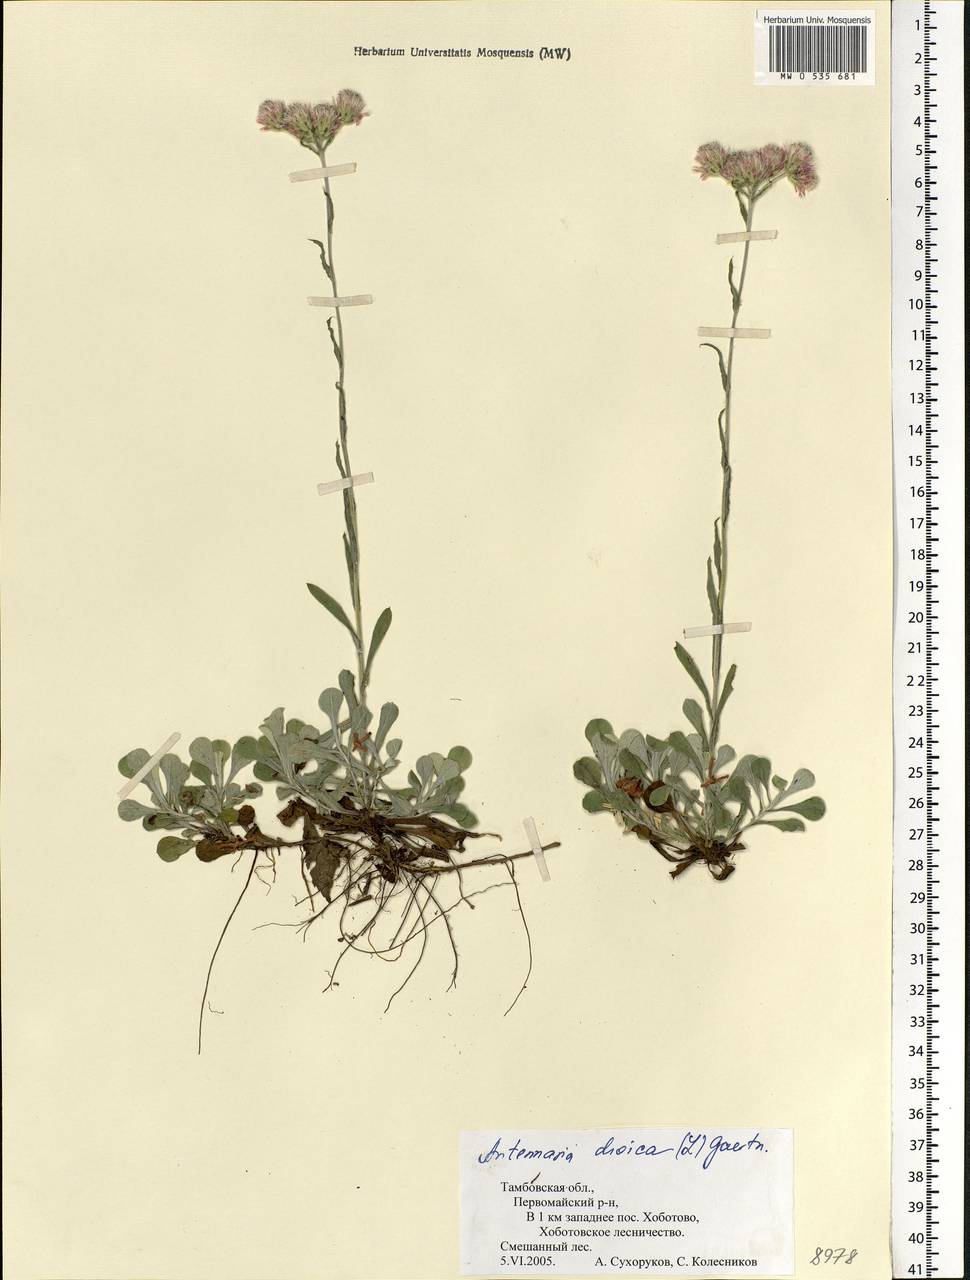 Antennaria dioica (L.) Gaertn., Eastern Europe, Central forest-and-steppe region (E6) (Russia)